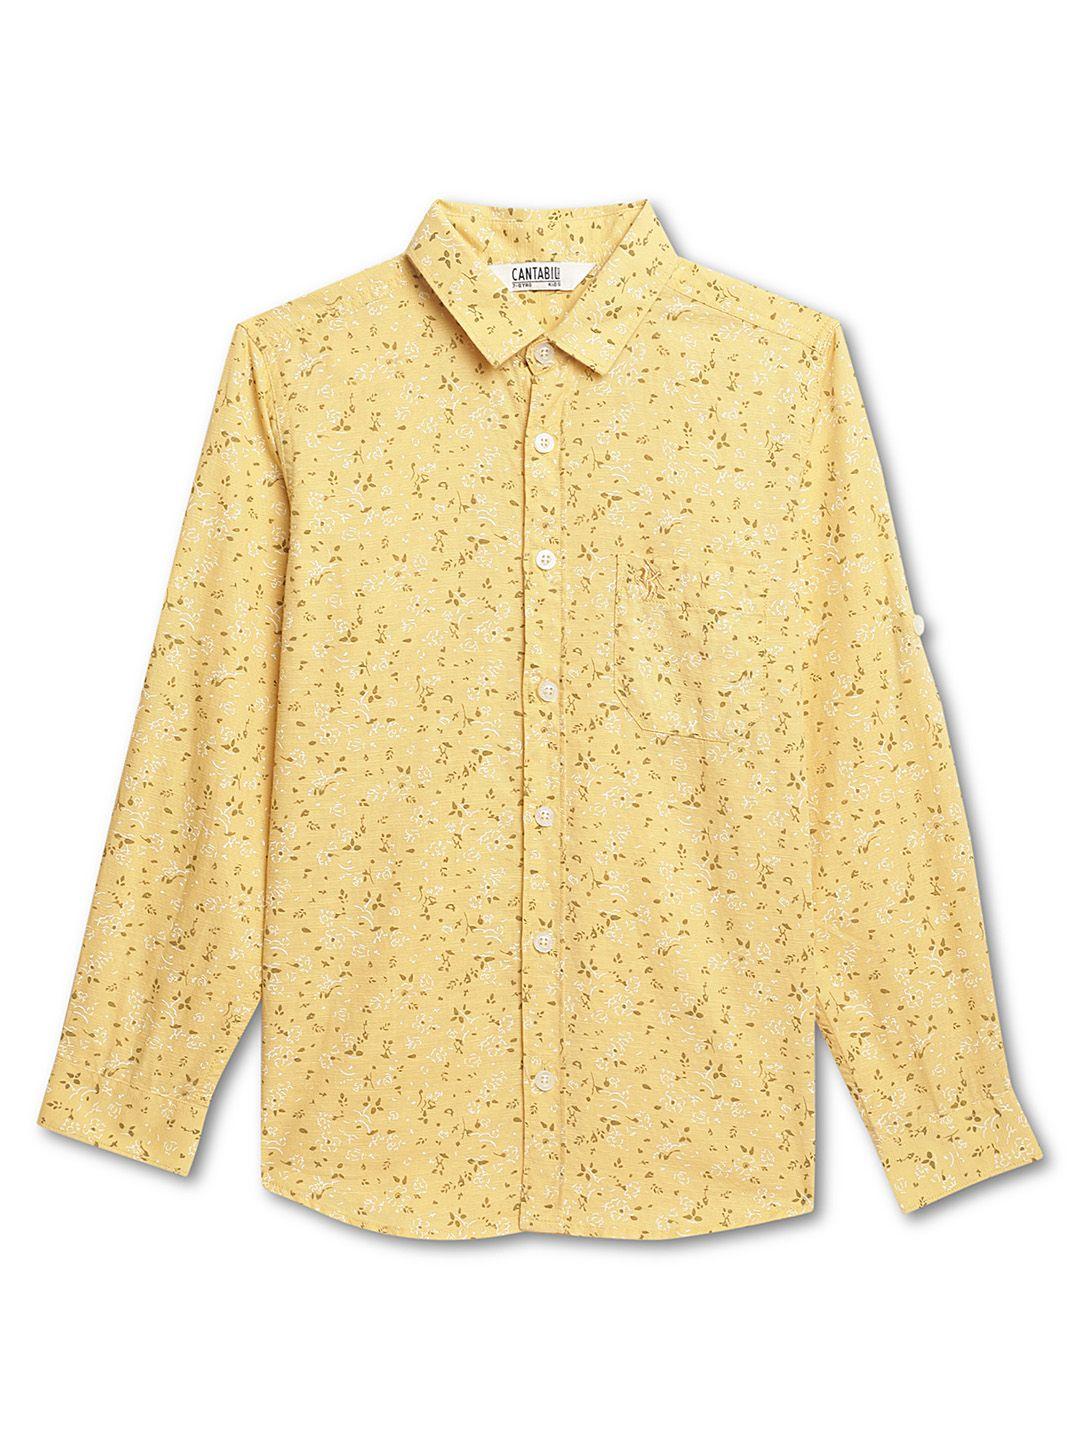 cantabil-boys-yellow-classic-opaque-printed-casual-shirt